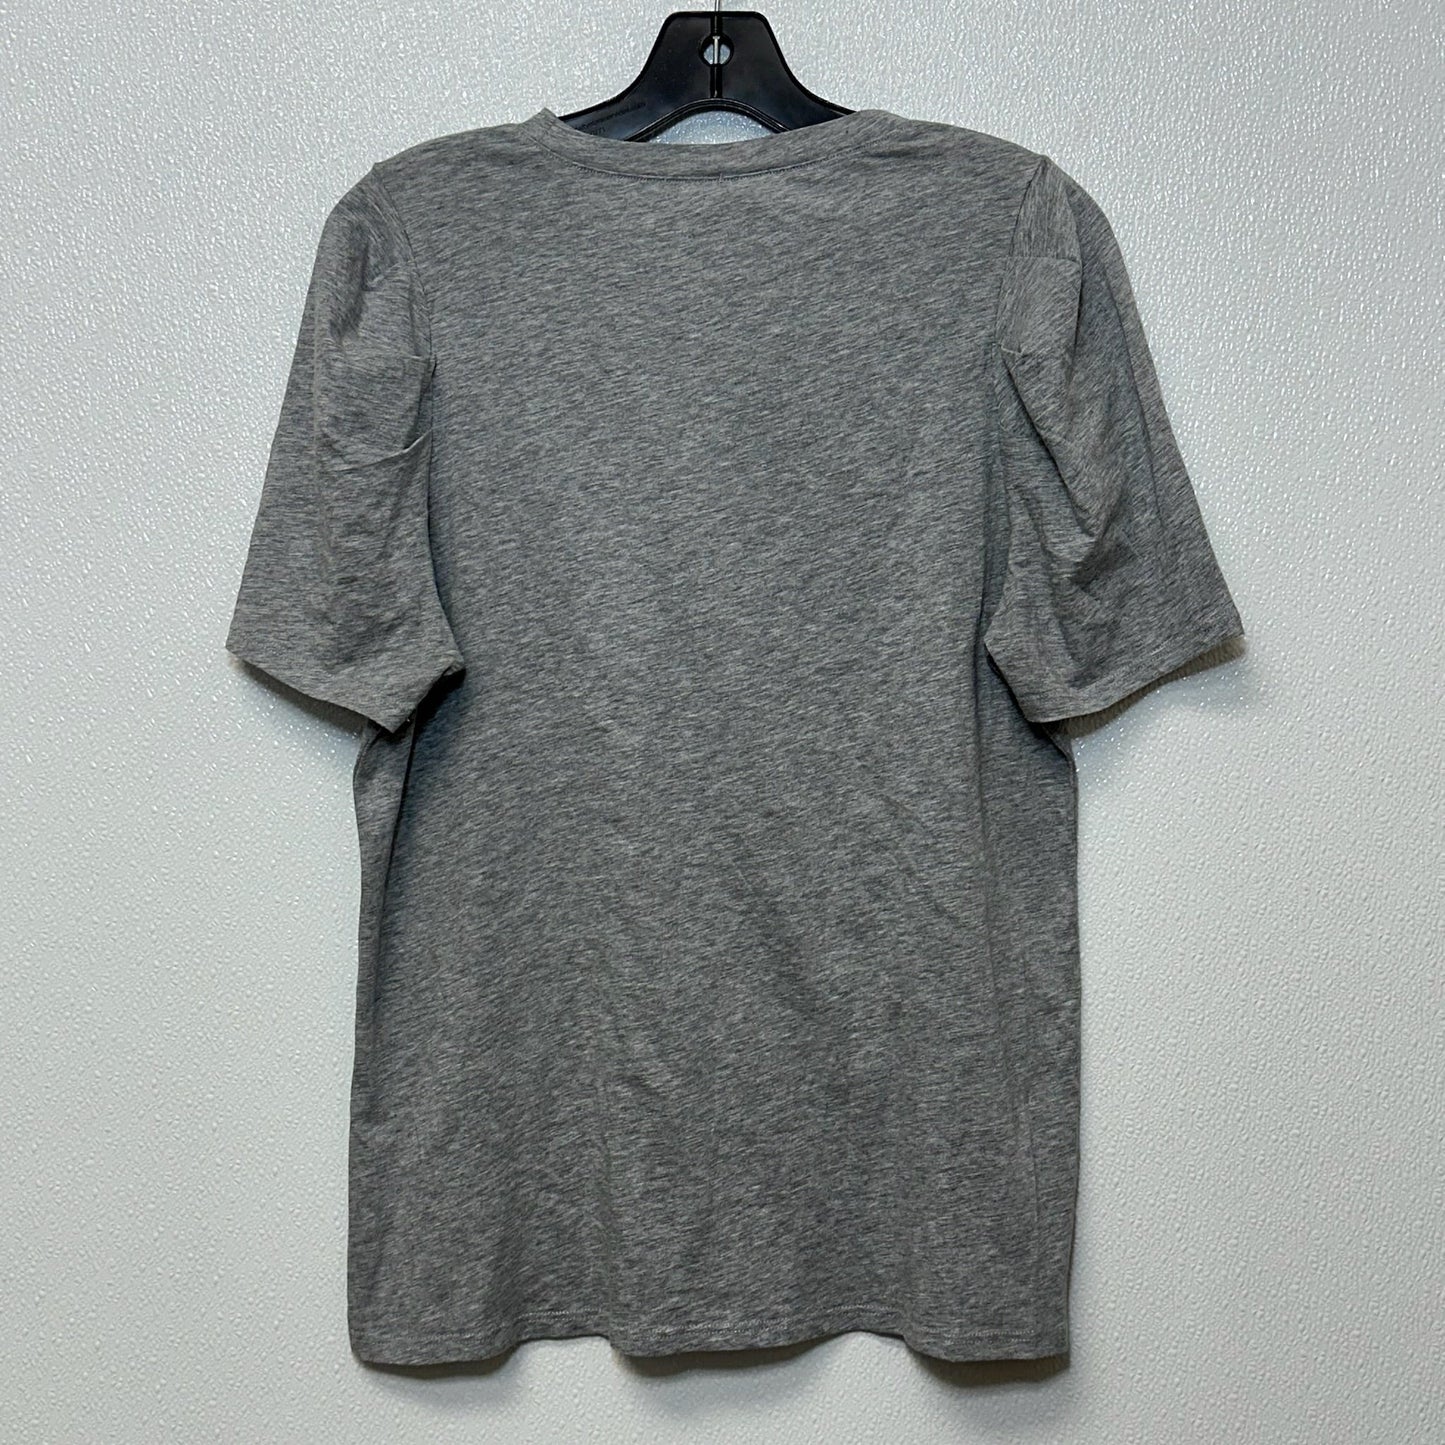 Grey Top Short Sleeve Basic Clothes Mentor, Size M